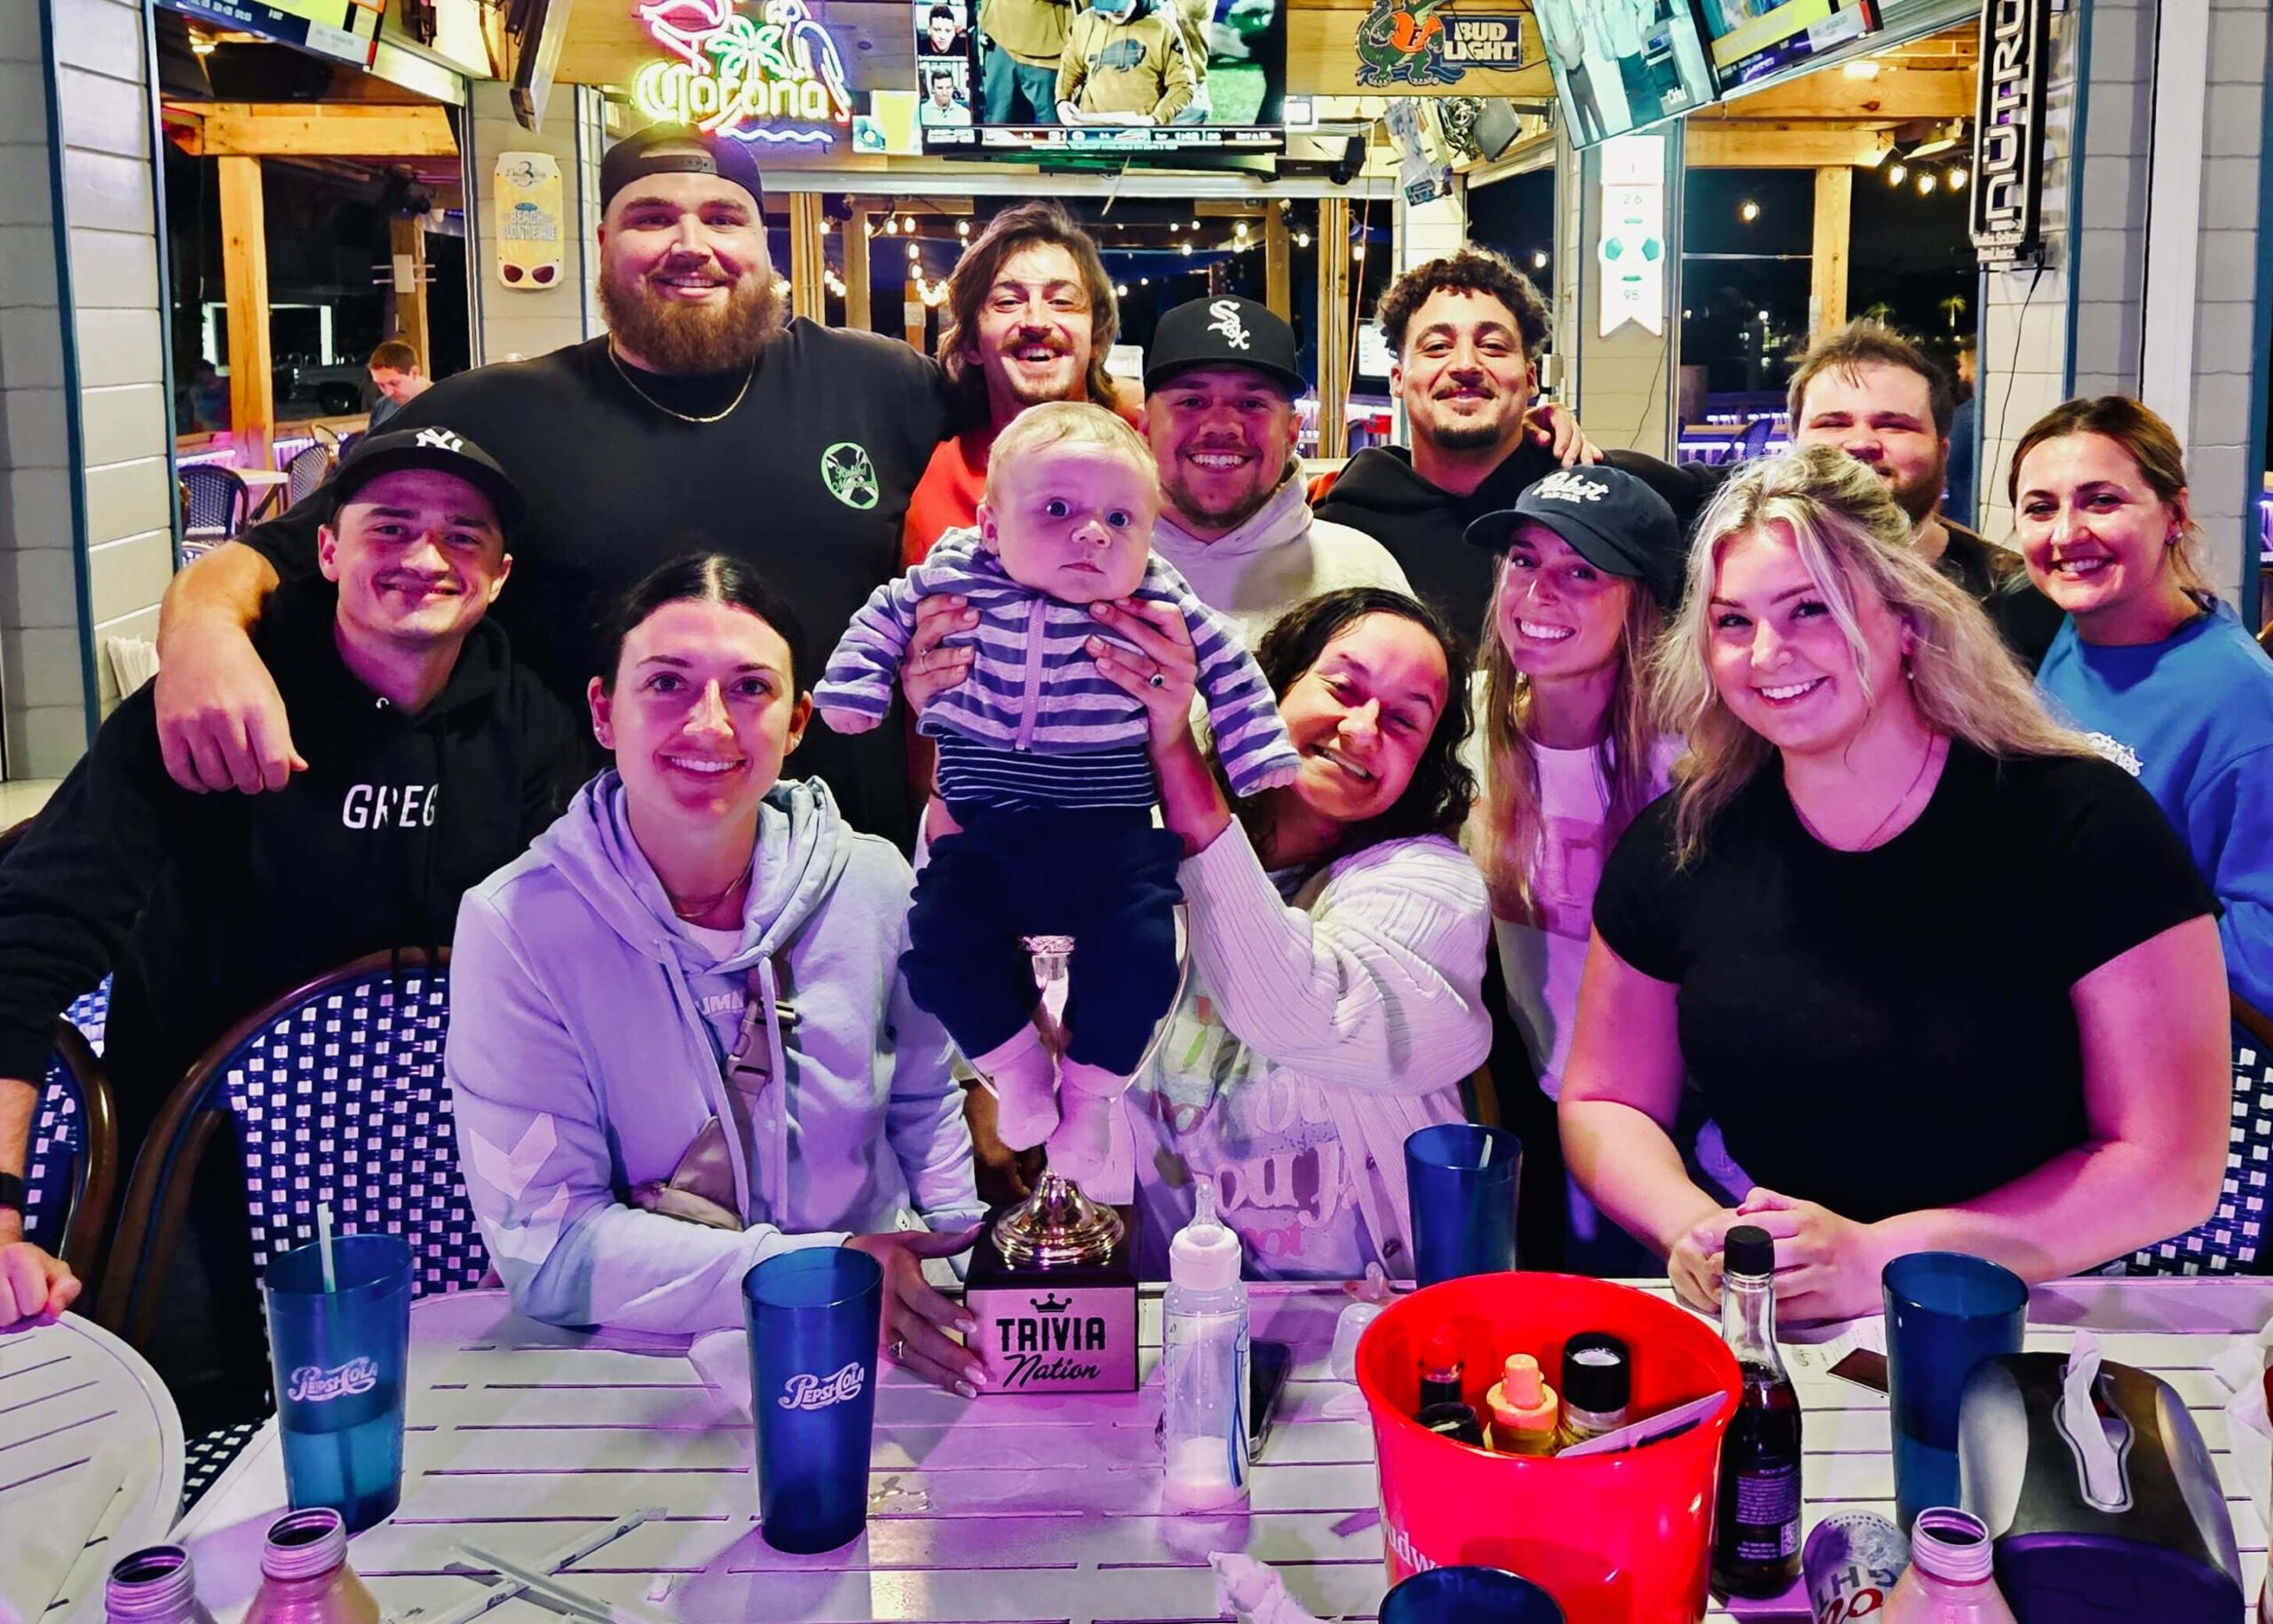 Caddy's Indian Shores FL 33785 trivia night: group of young people all standing together in front of a table smiling while a woman in front holds up a baby seated on top of a Trivia Nation trophy